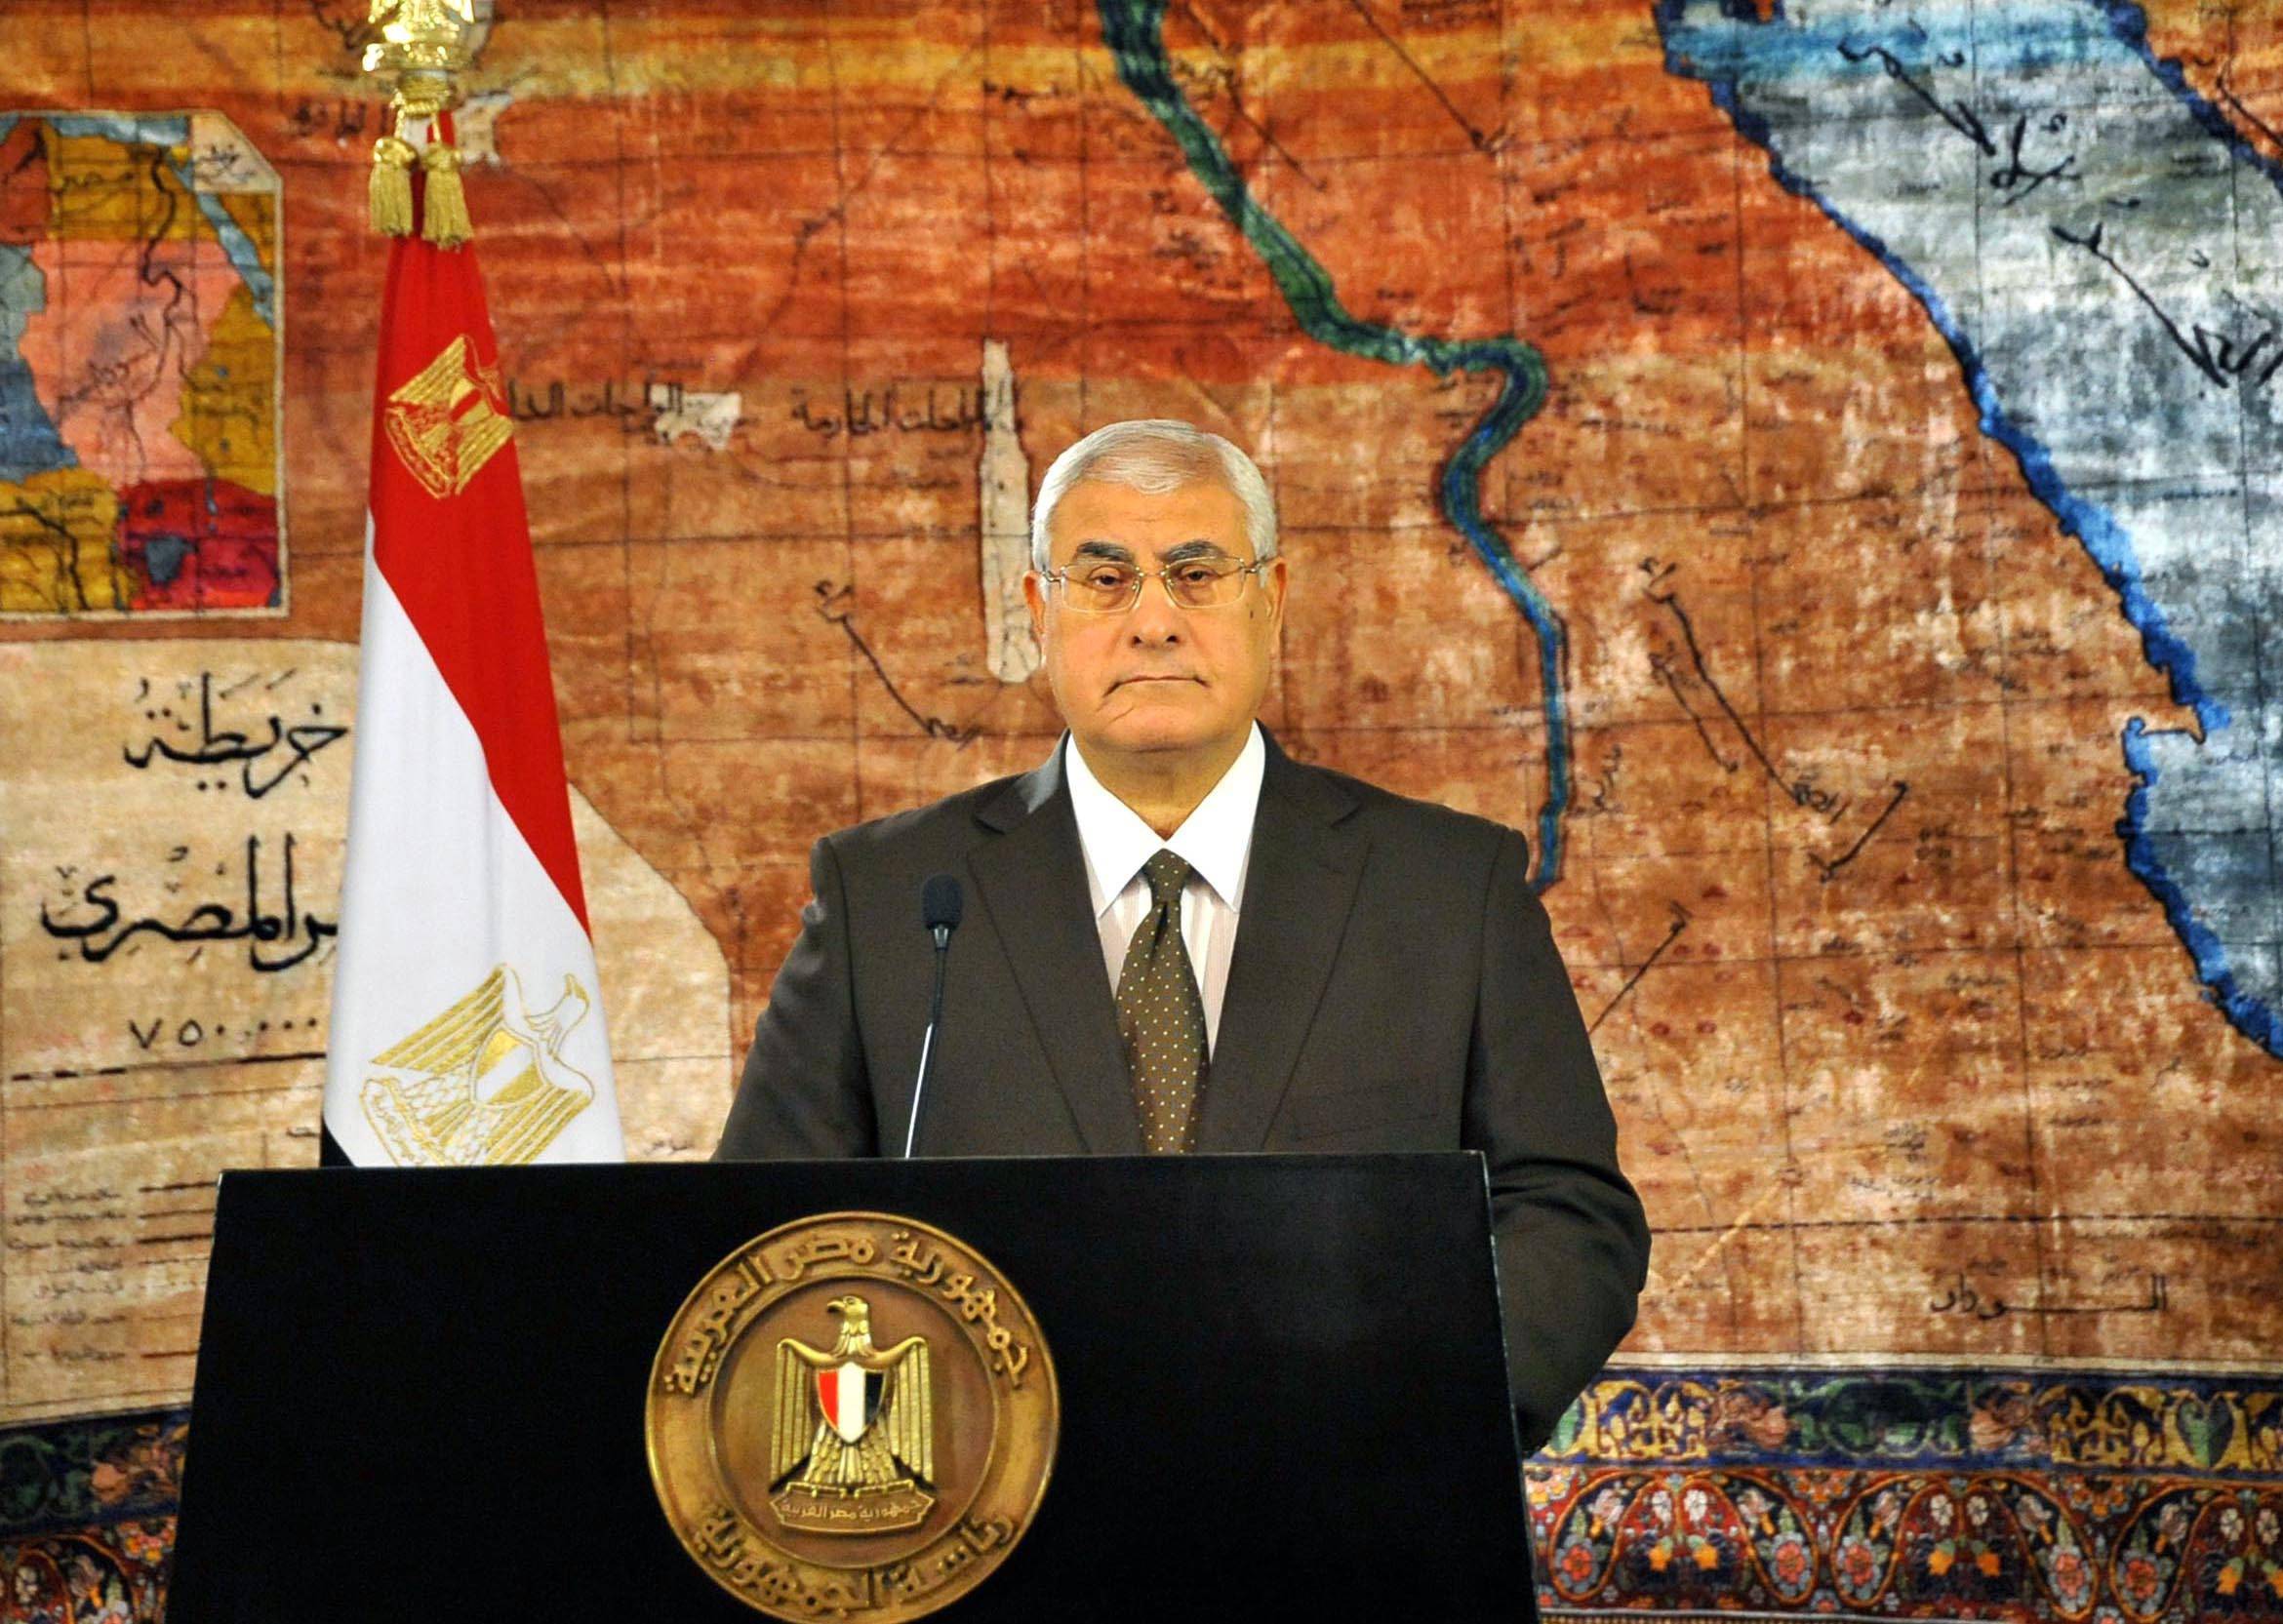 Egypt to allow appeals against military court verdicts